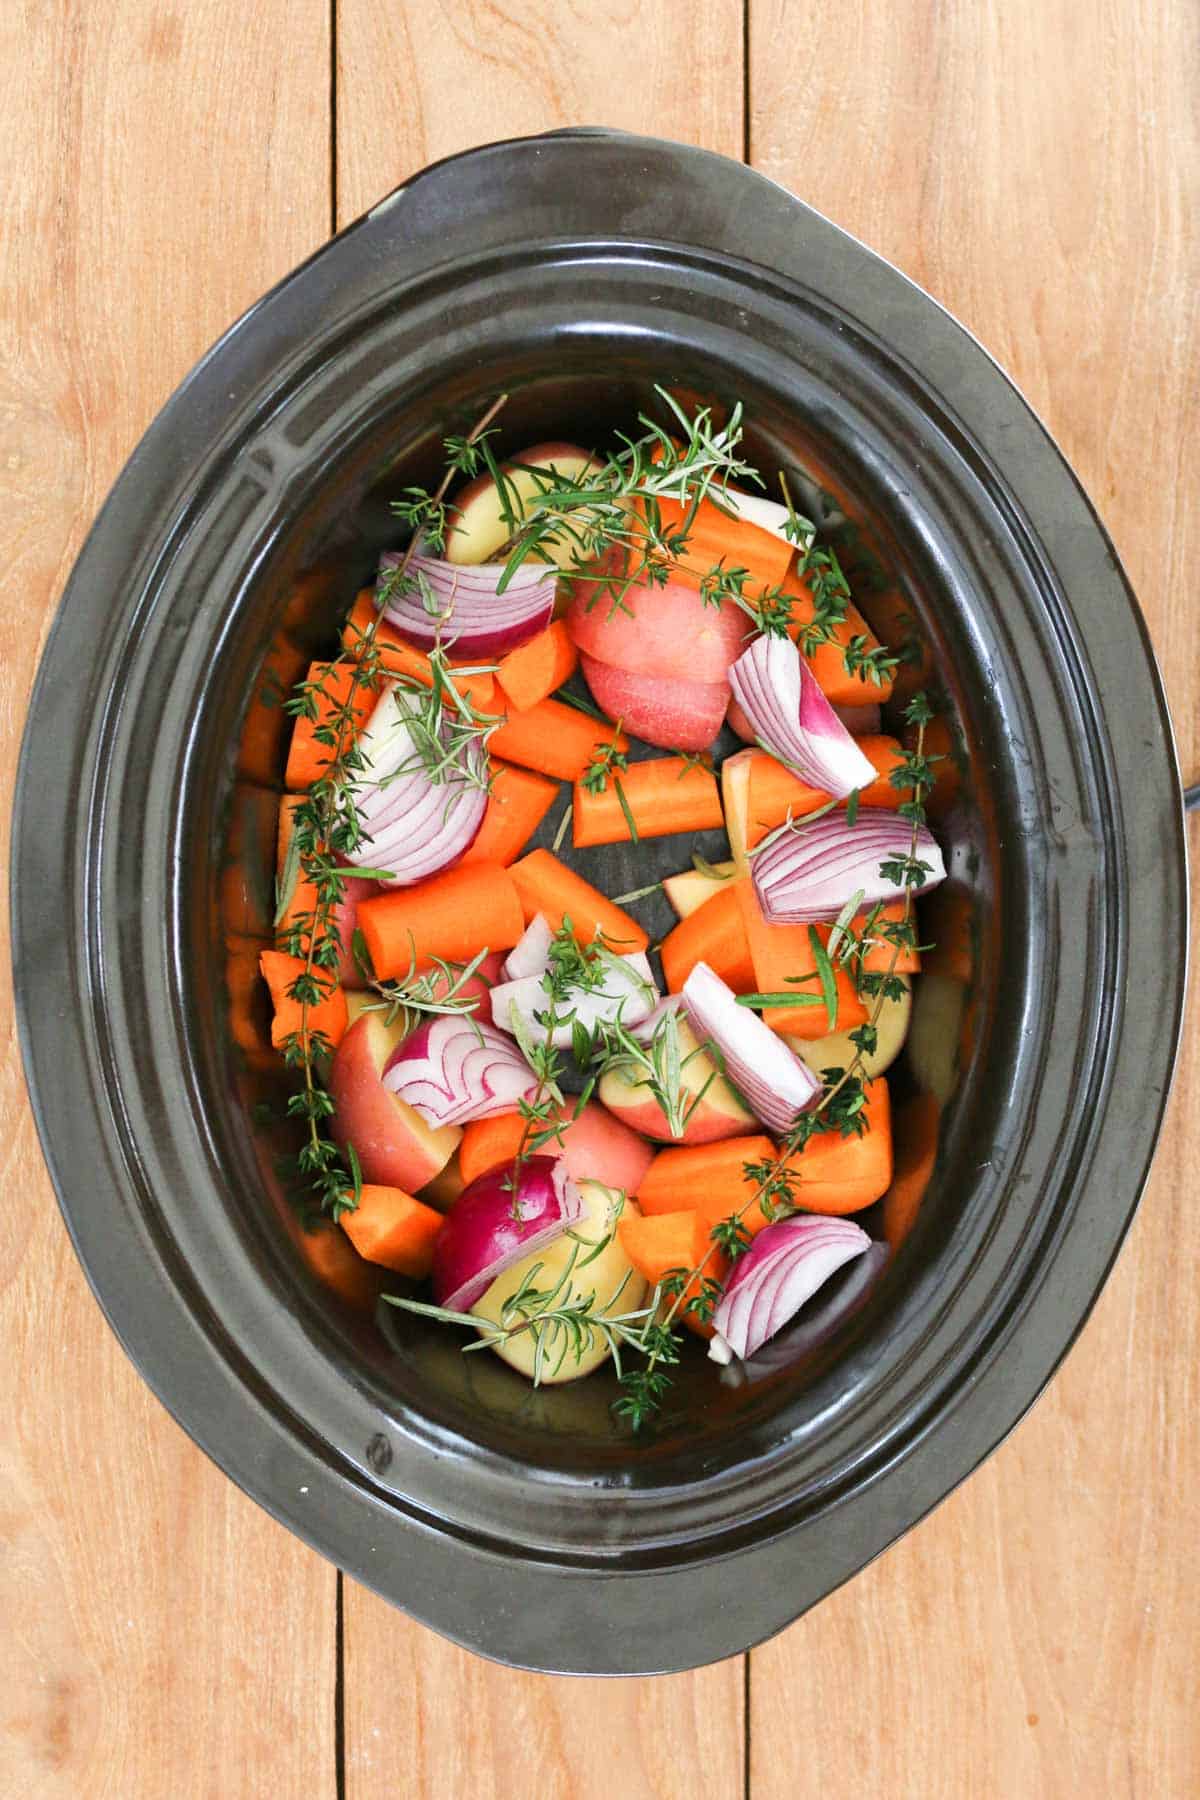 Vegetables and herbs in a slow cooker.